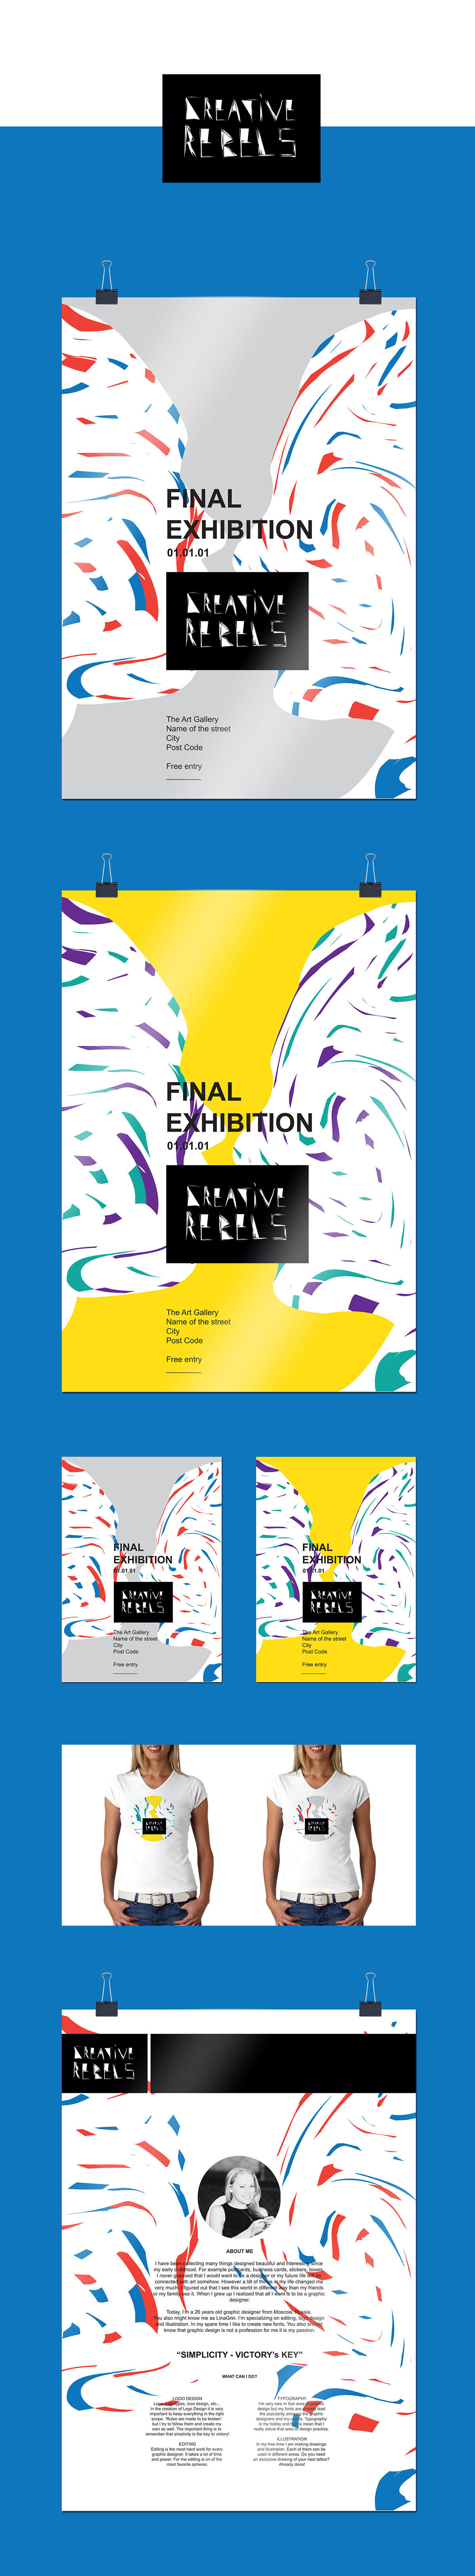 Promotion degree show degree Show Exhibition  graphic final identity logo Illustrator group Collaboration